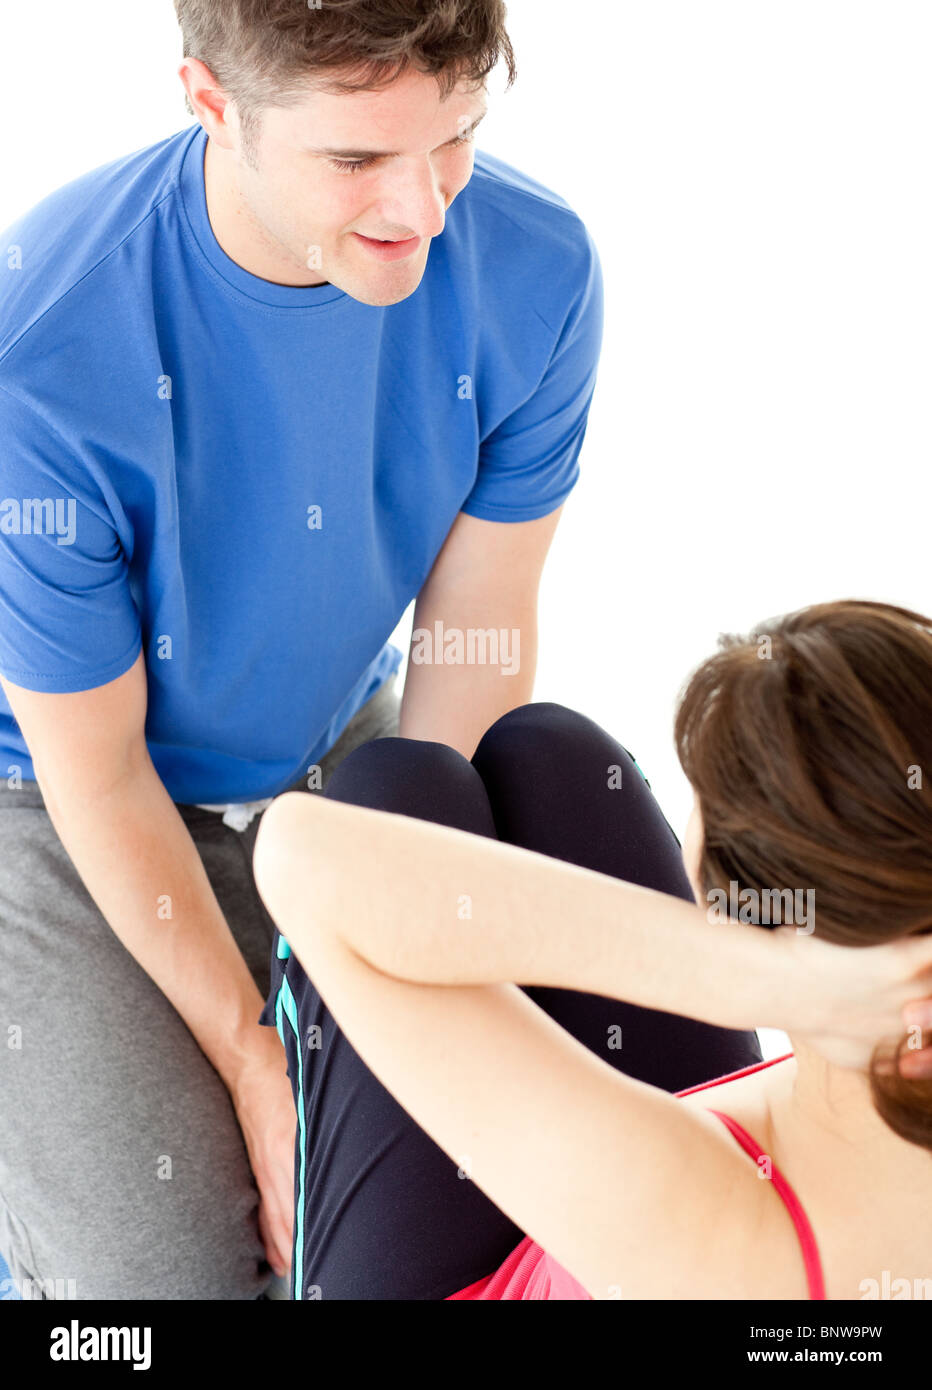 Brunette woman doing sit-ups assited by her personal trainer Stock Photo